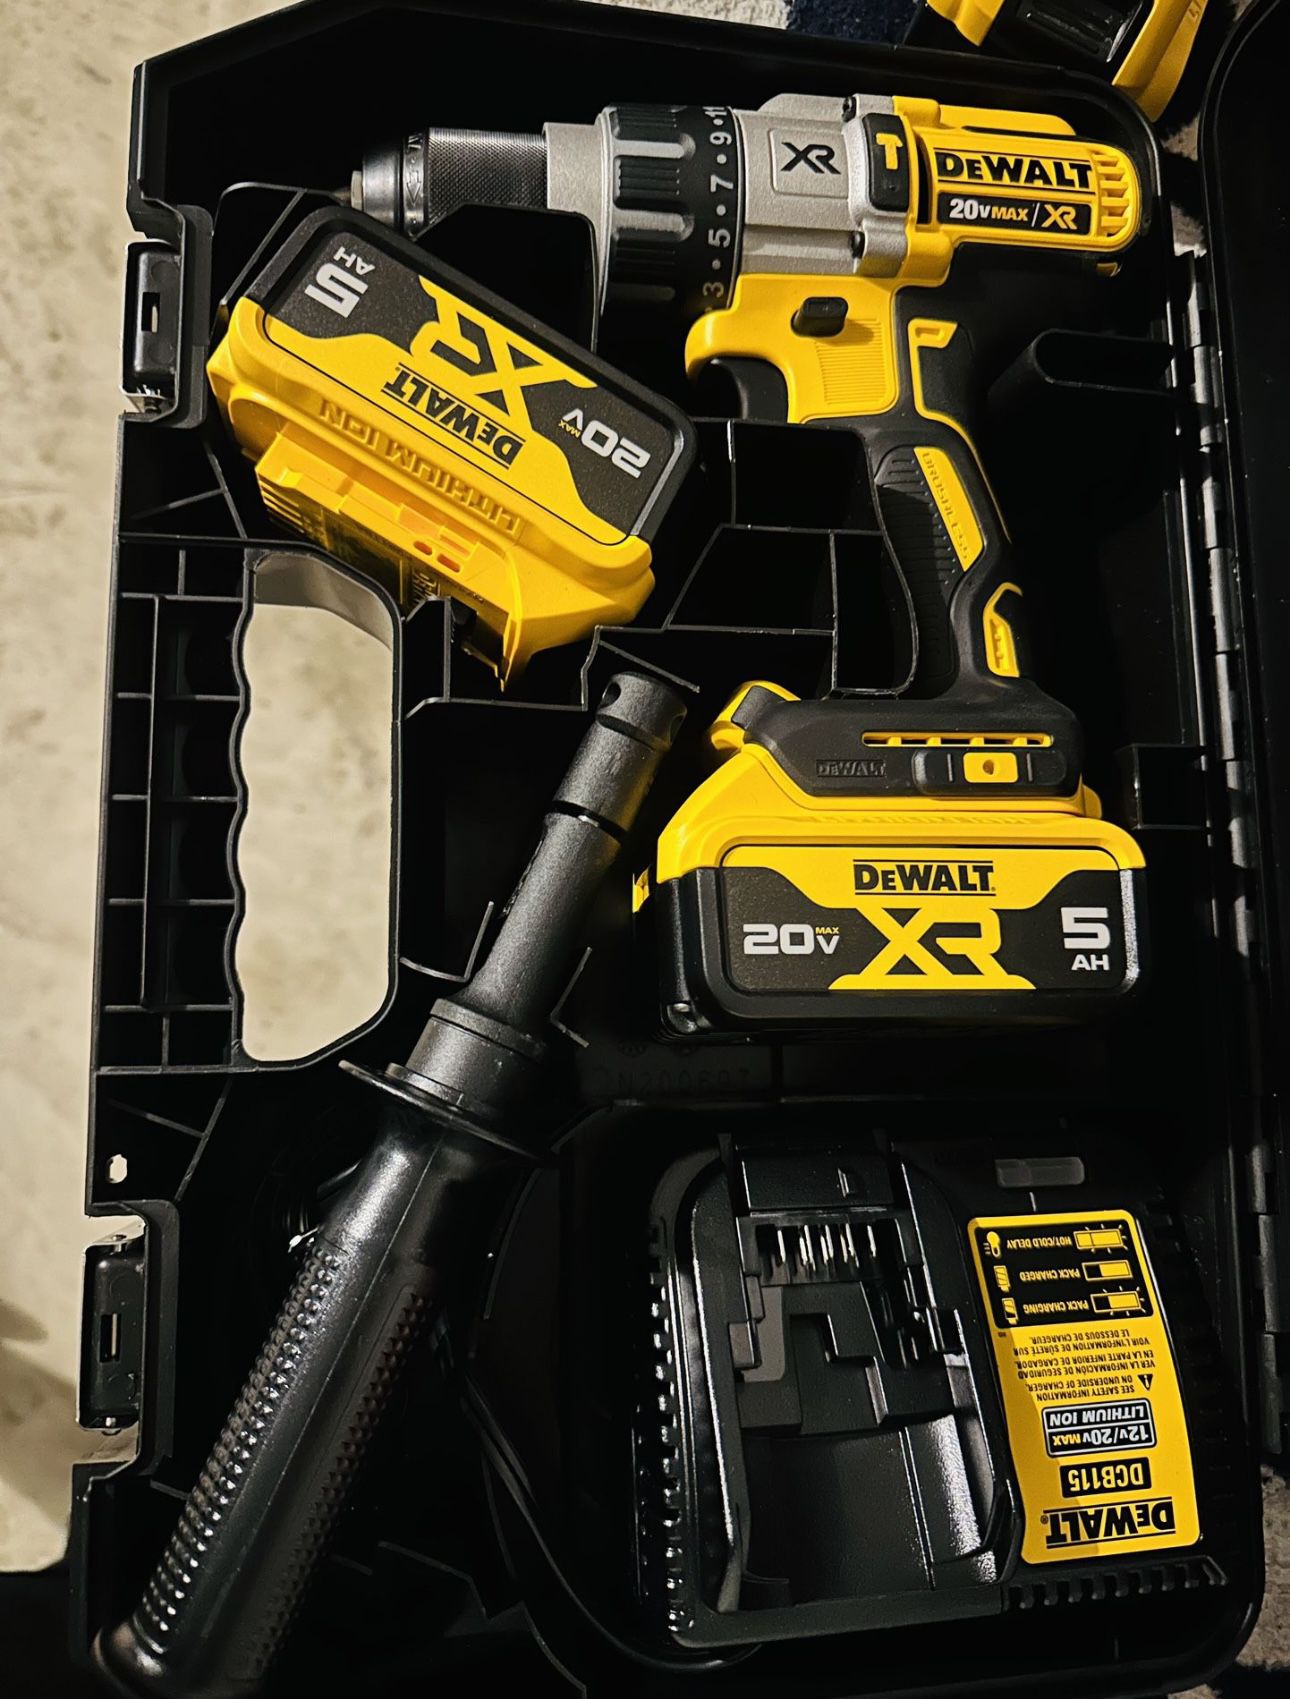 DEWALT XR  Hammer Drill  1/2-in 20-volt Max 3 Speed Brushless Cordless Hammer Drill (Bare Tool Only No Battery Or Charger )